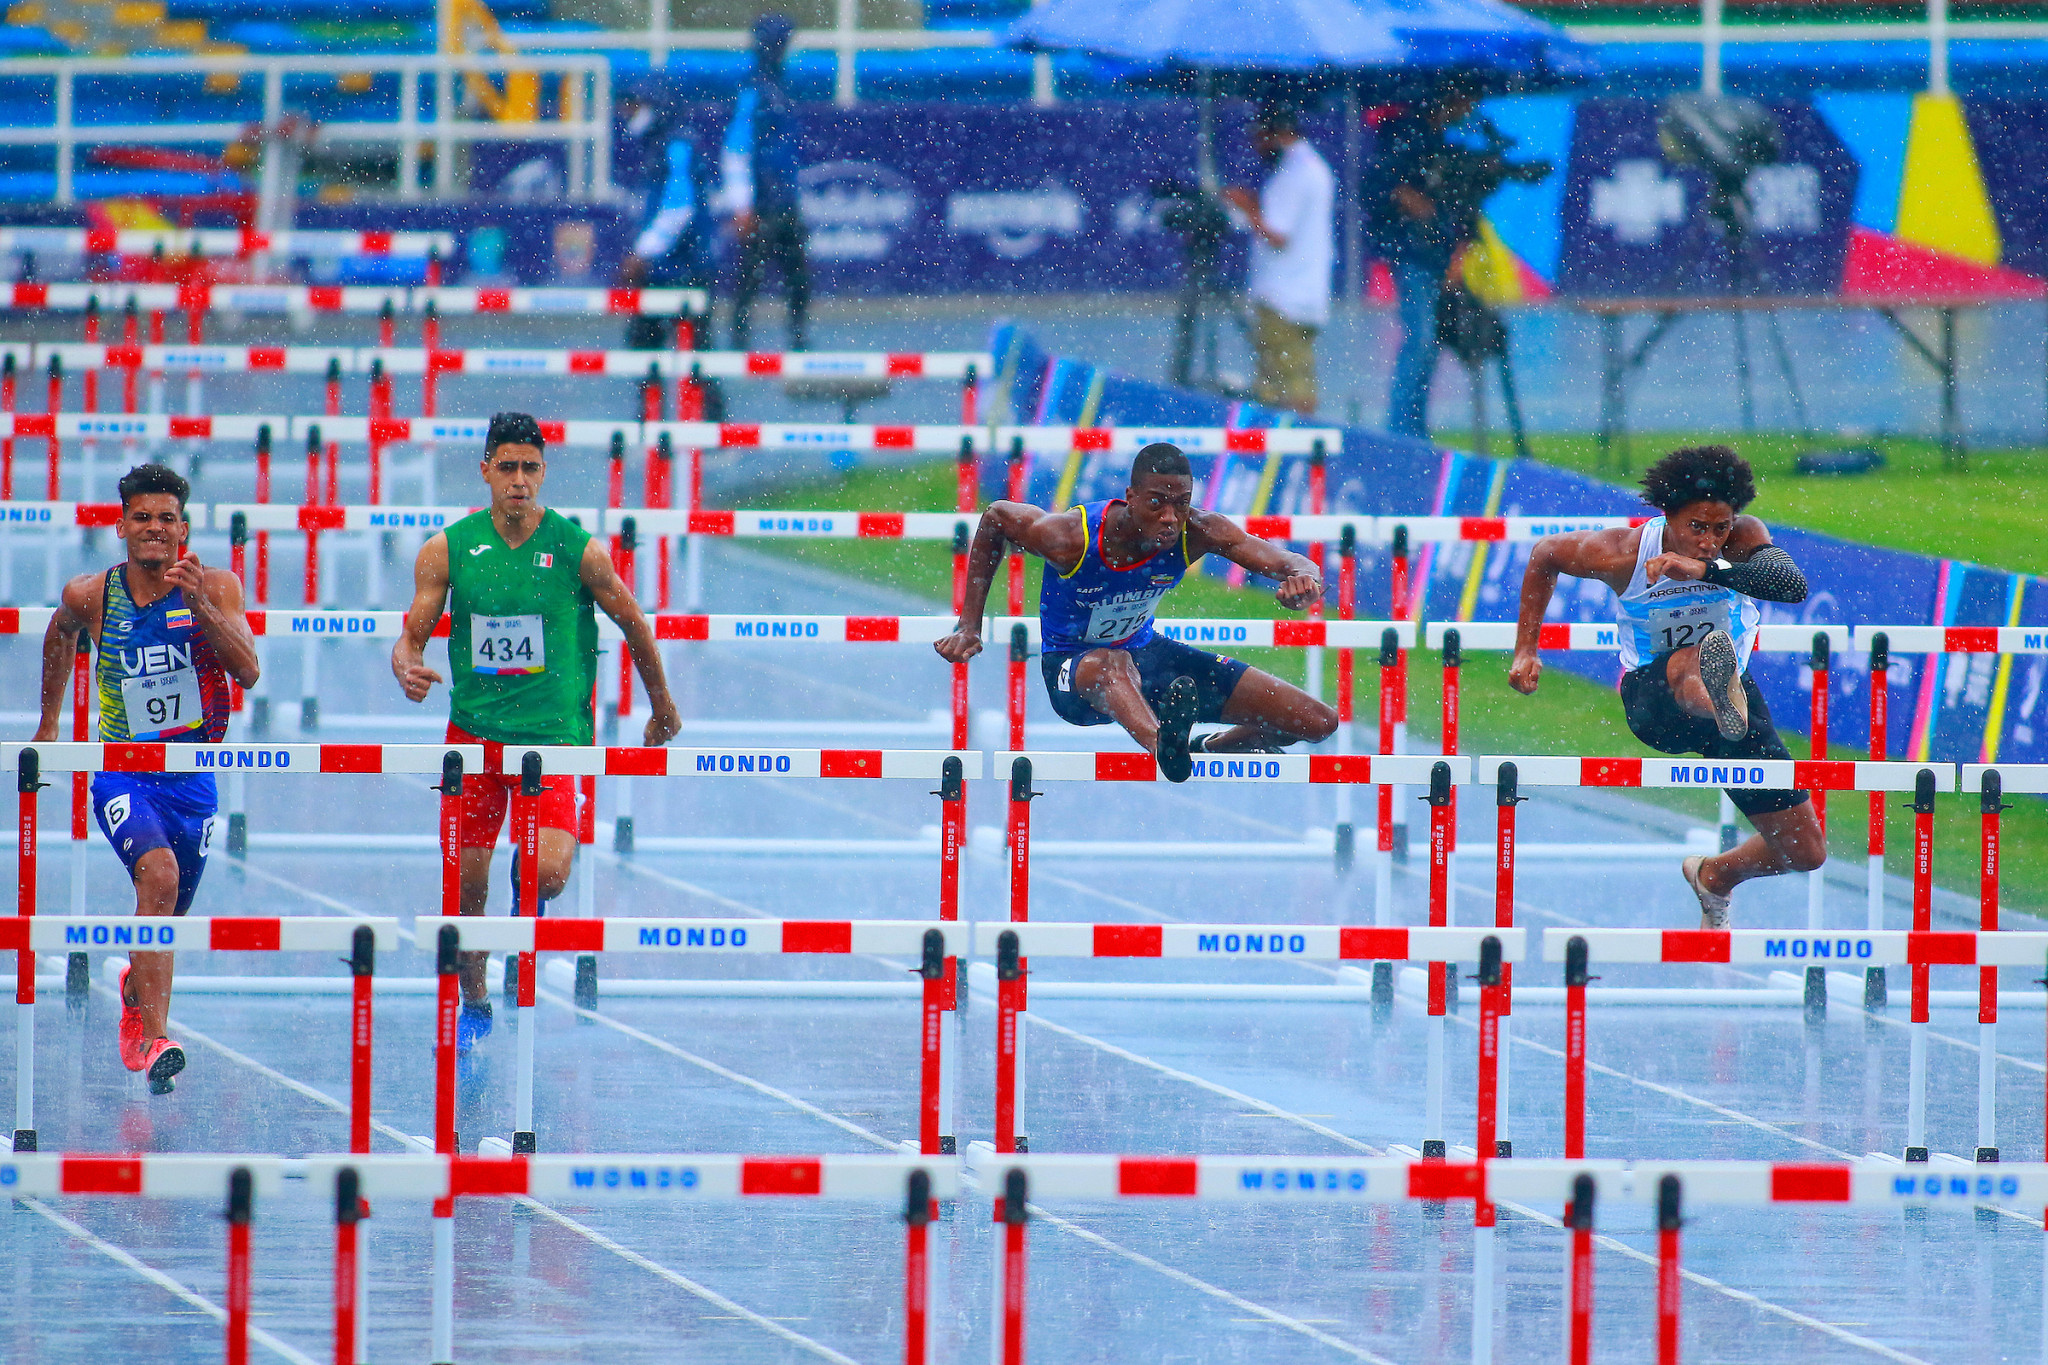 The men's decathlon began in a torrential downpour at the Pascual Guerrero Olympic Stadium ©Agencia.Xpress Media